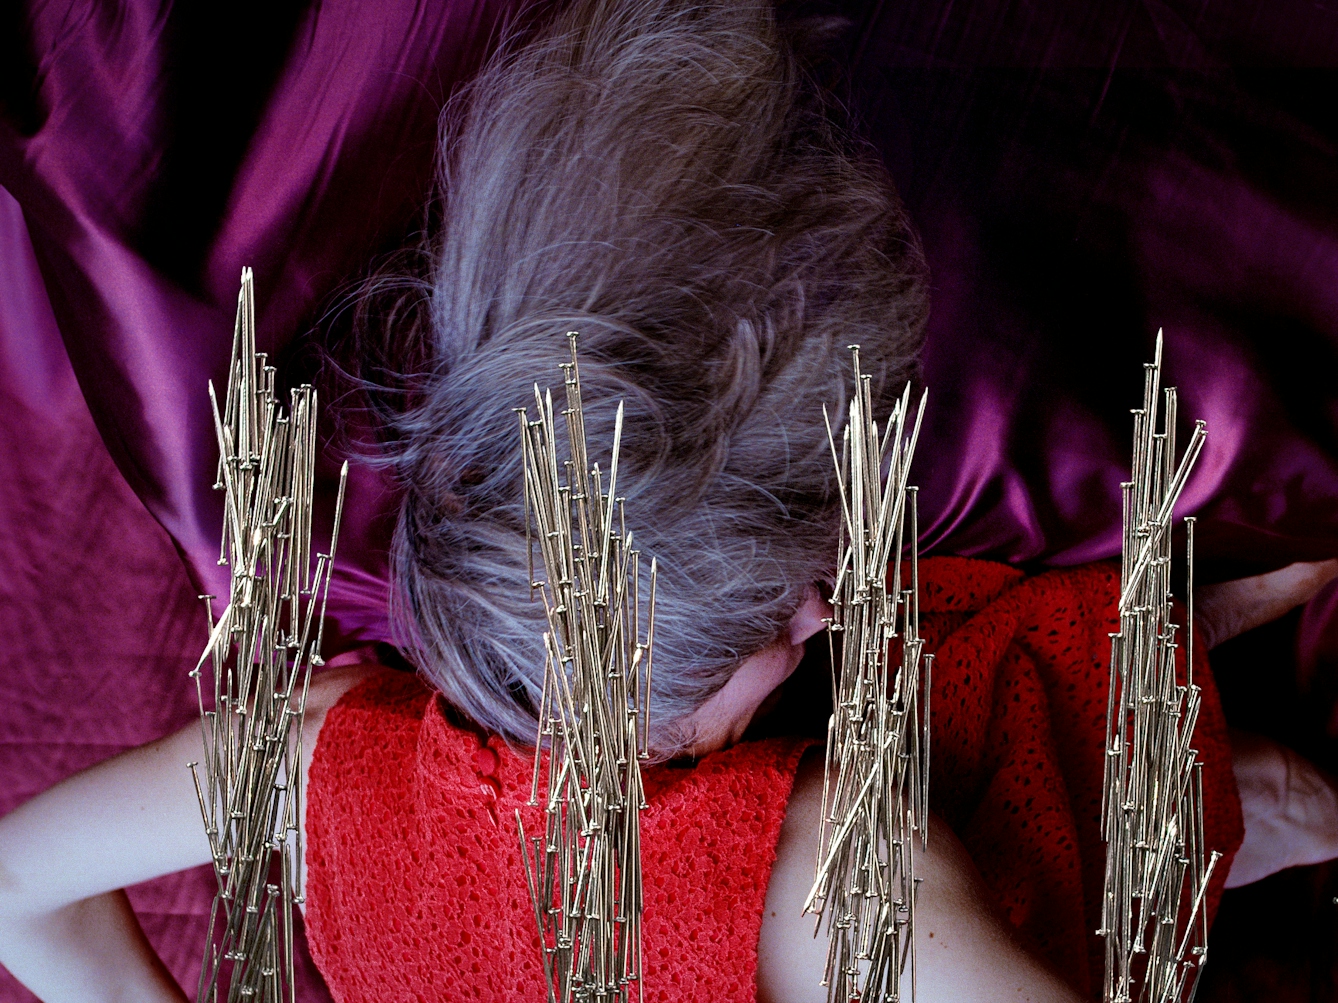 Detail from a larger artwork created with a colour photographic print of a female figure in a bright red dress, set against a purple and blue draped silk background. The detail shows the woman's head and part of the 4 pillars made of dress pins.